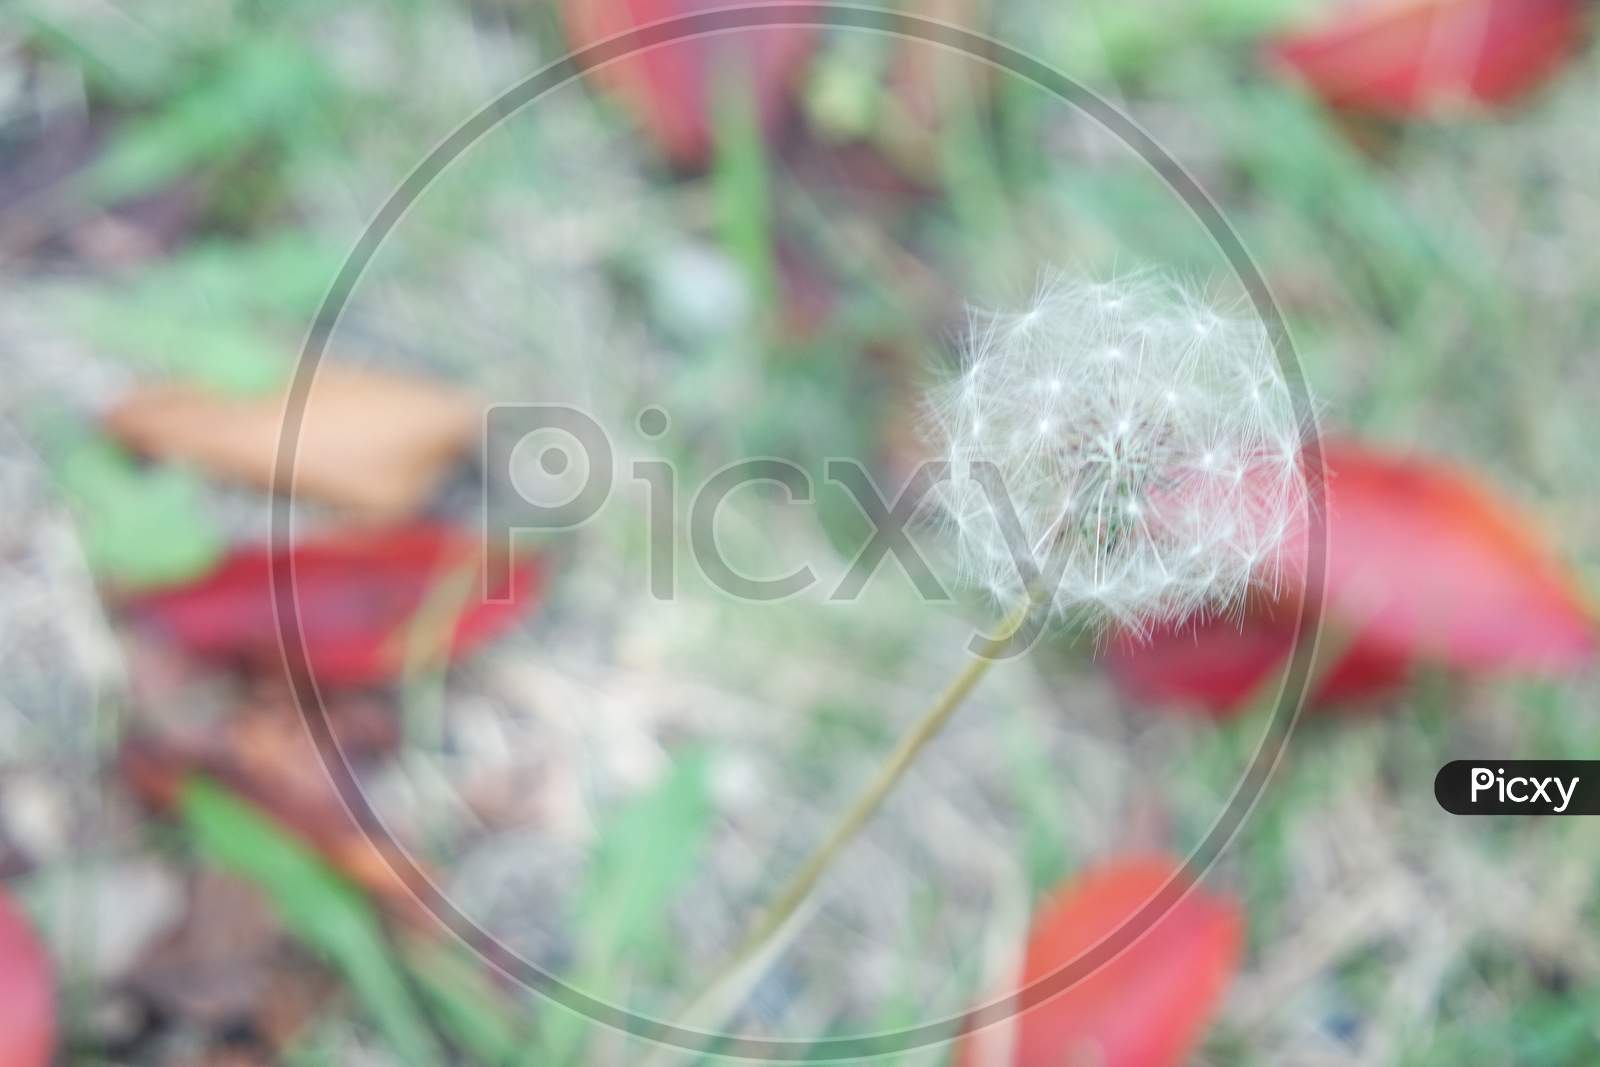 Fluffy Flower Dandelion Selectively Focused On A Blurred Green Background